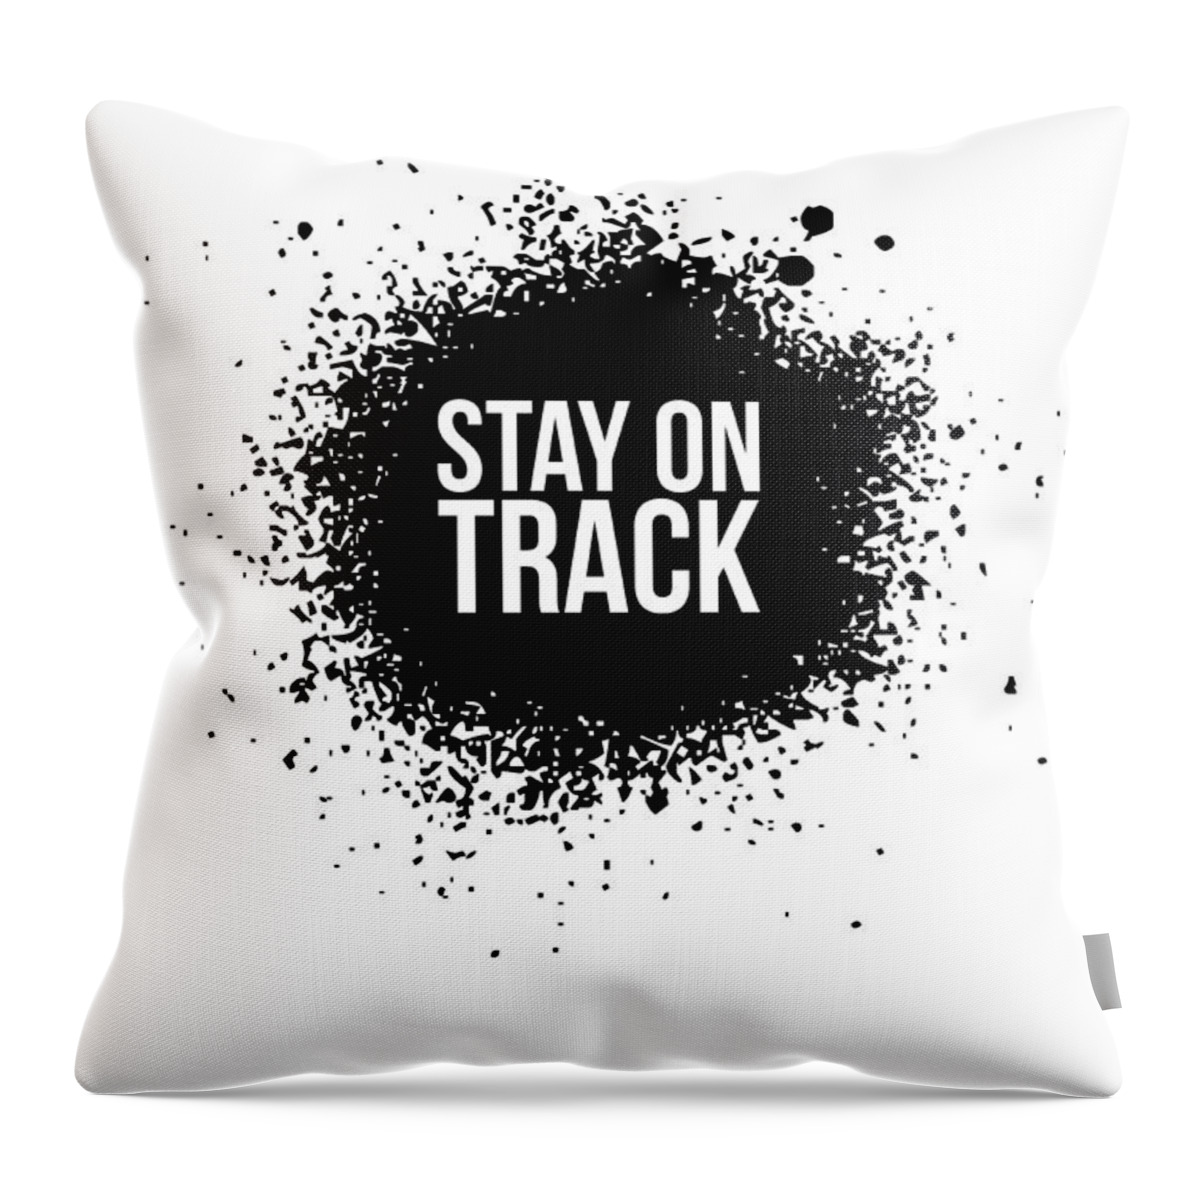 Motivational Throw Pillow featuring the digital art Stay on Track Poster White by Naxart Studio